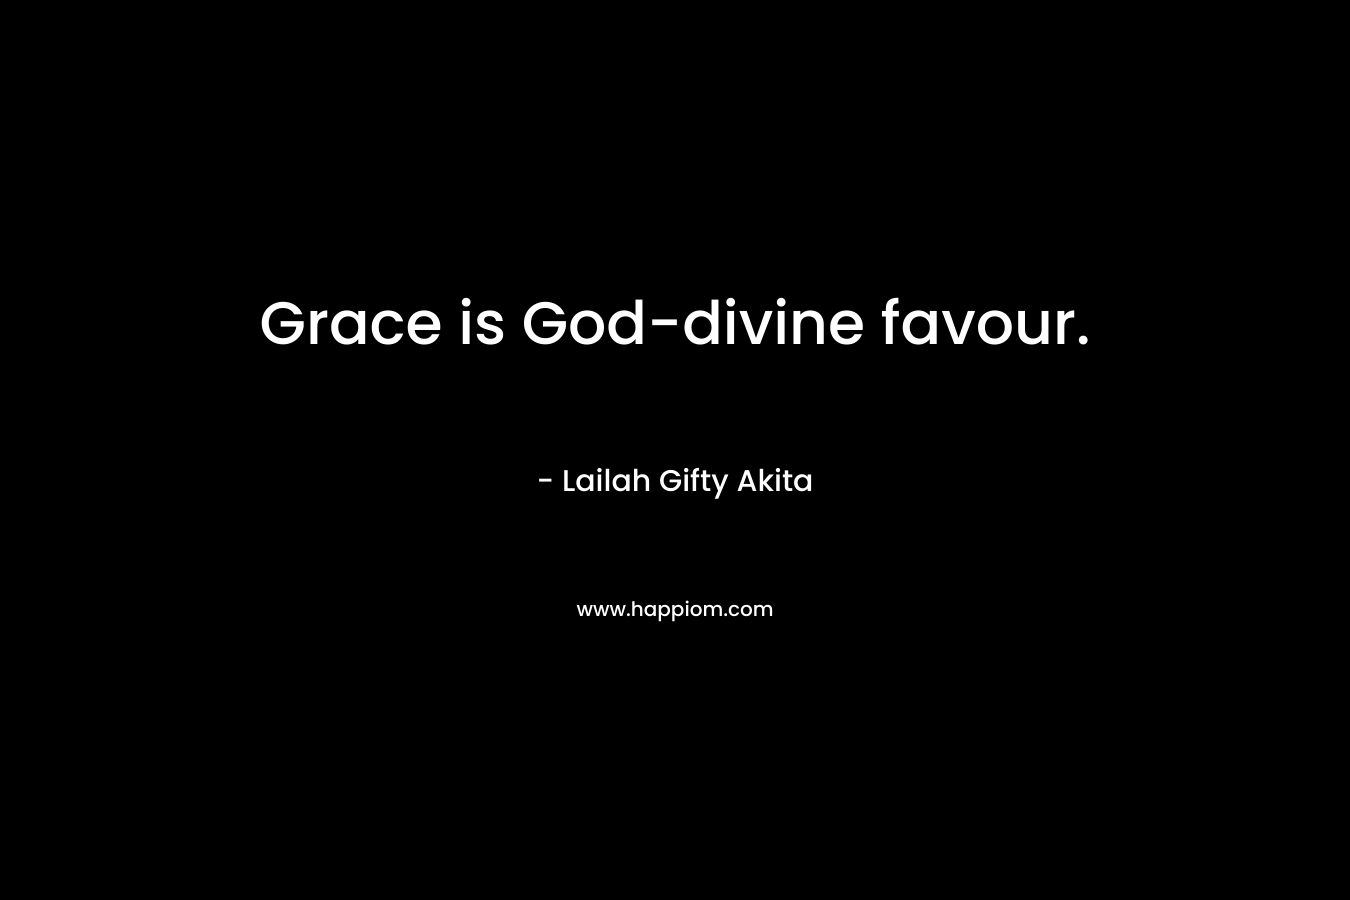 Grace is God-divine favour. – Lailah Gifty Akita